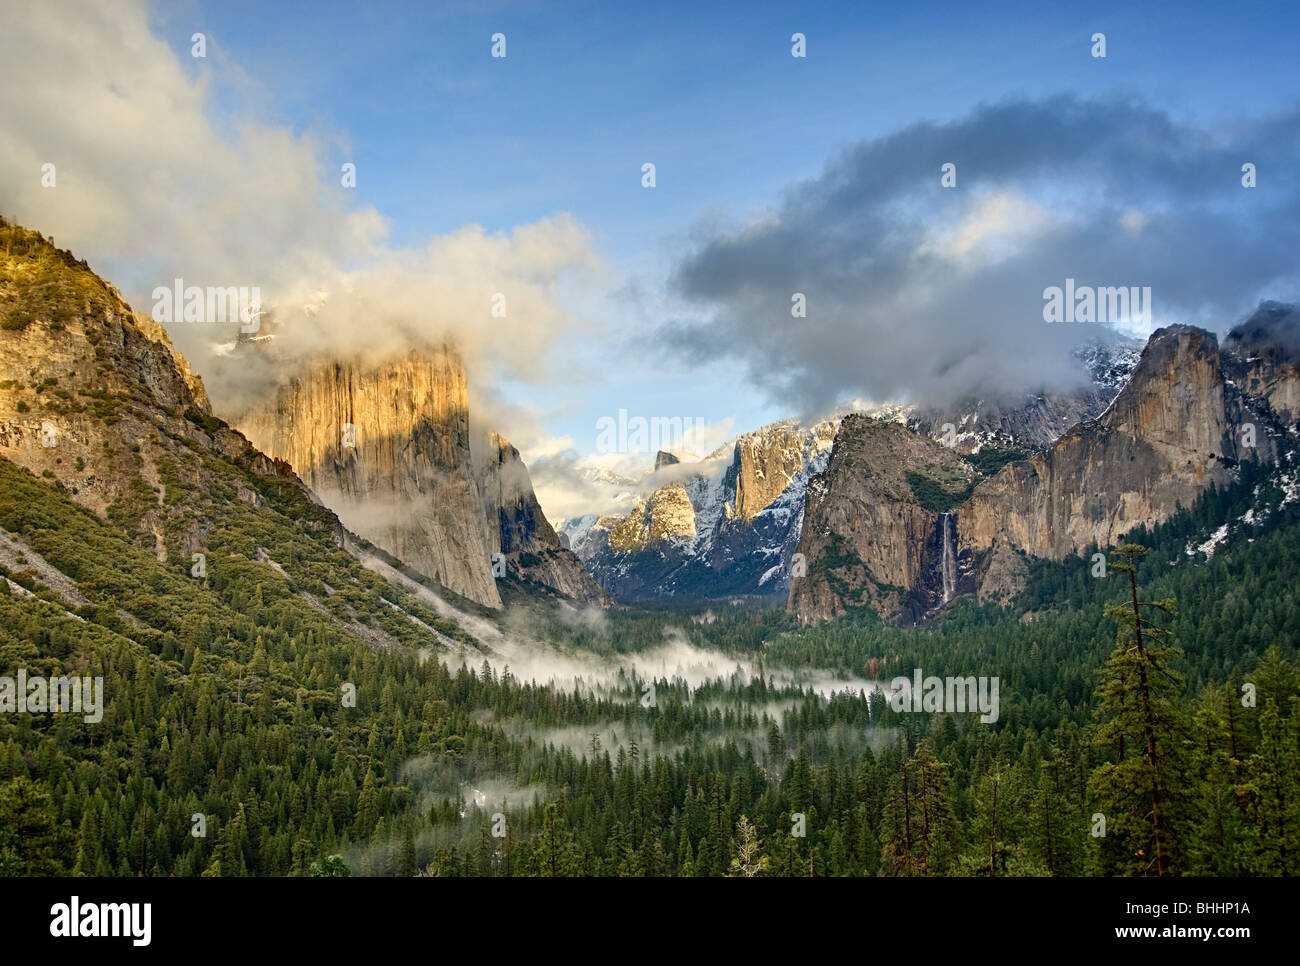 Dramatic View of Yosemite National Park from Tunnel View. Stock Photo